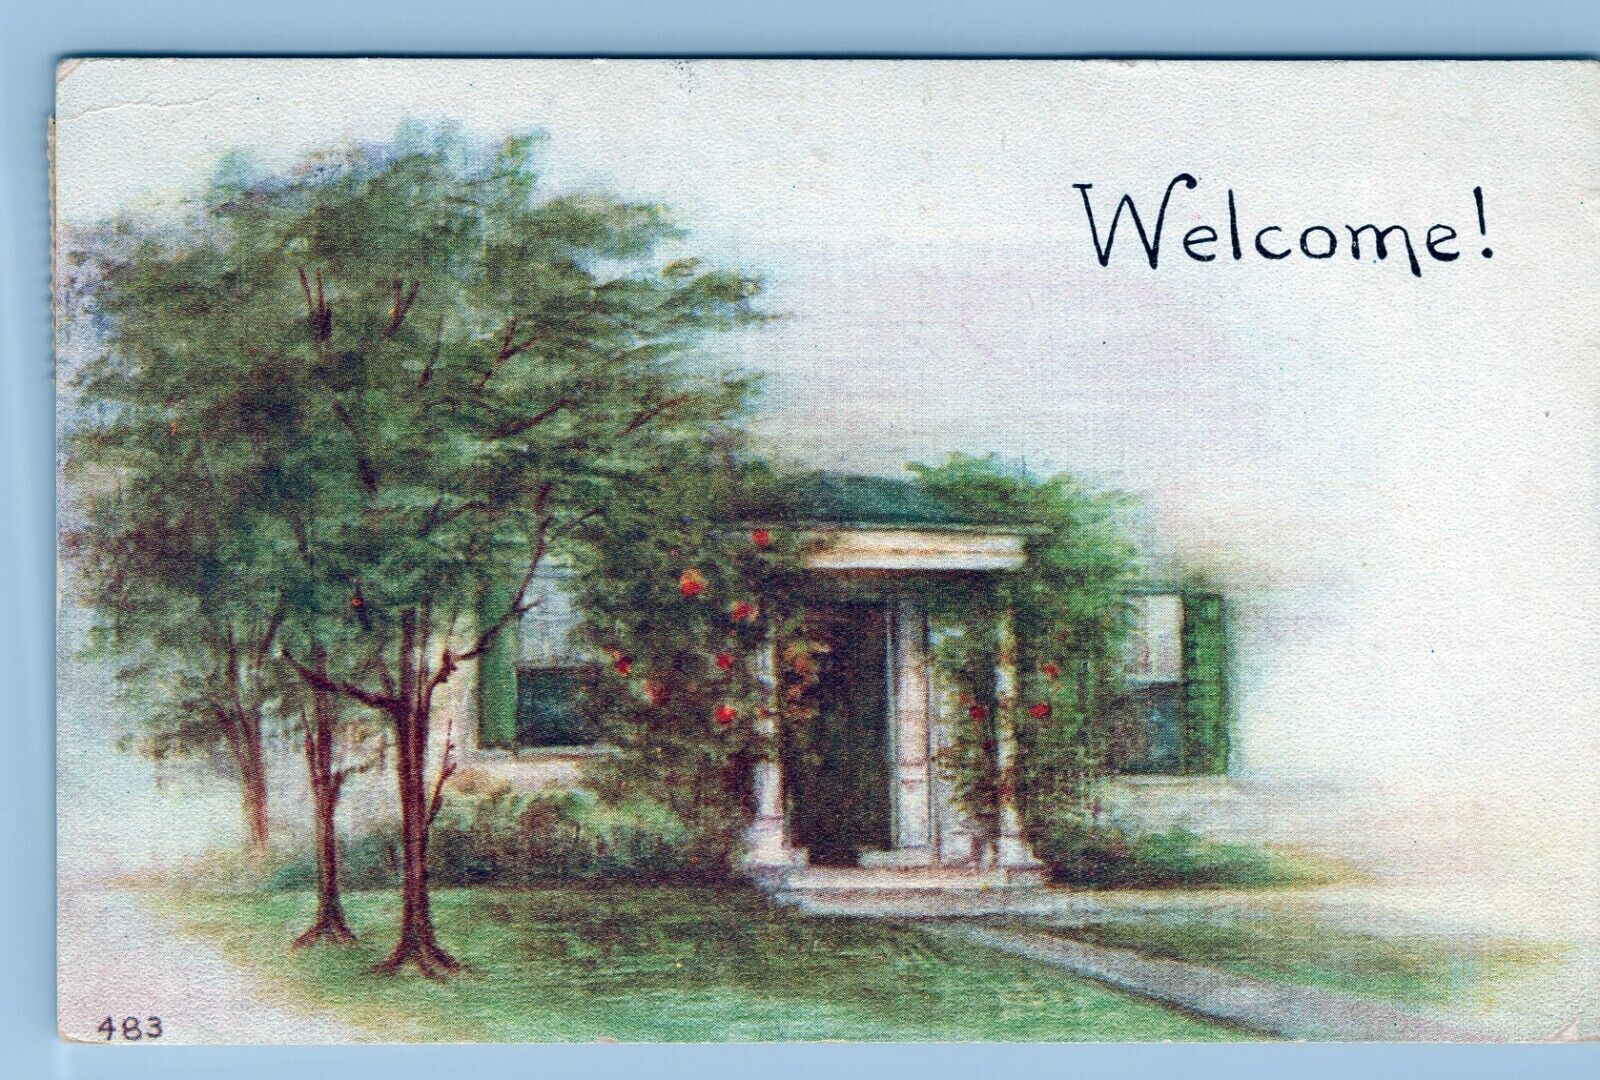 Welcome Home. Posted in 1913 Art Postcard